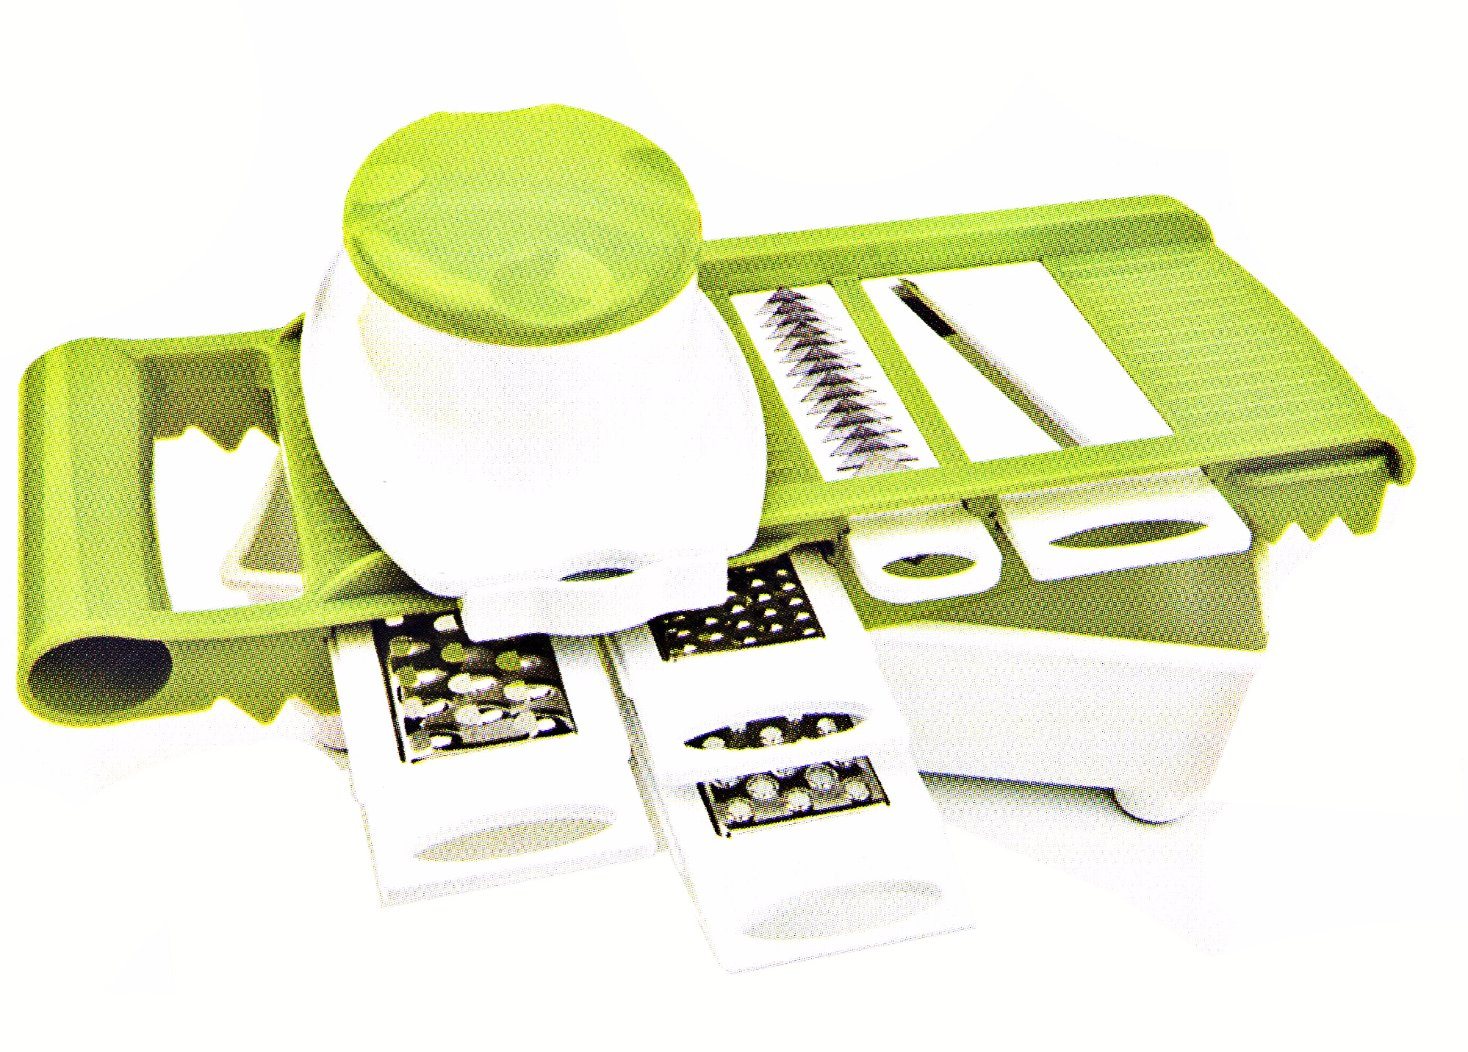 Rapid Delivery for Cute Animal Printed Dinner Set -
 5 in 1 Home Appliance Plastic Food Processor Vegetable Slicer Cutting Machine with Steel Parts No. Cg023 – Long Prosper